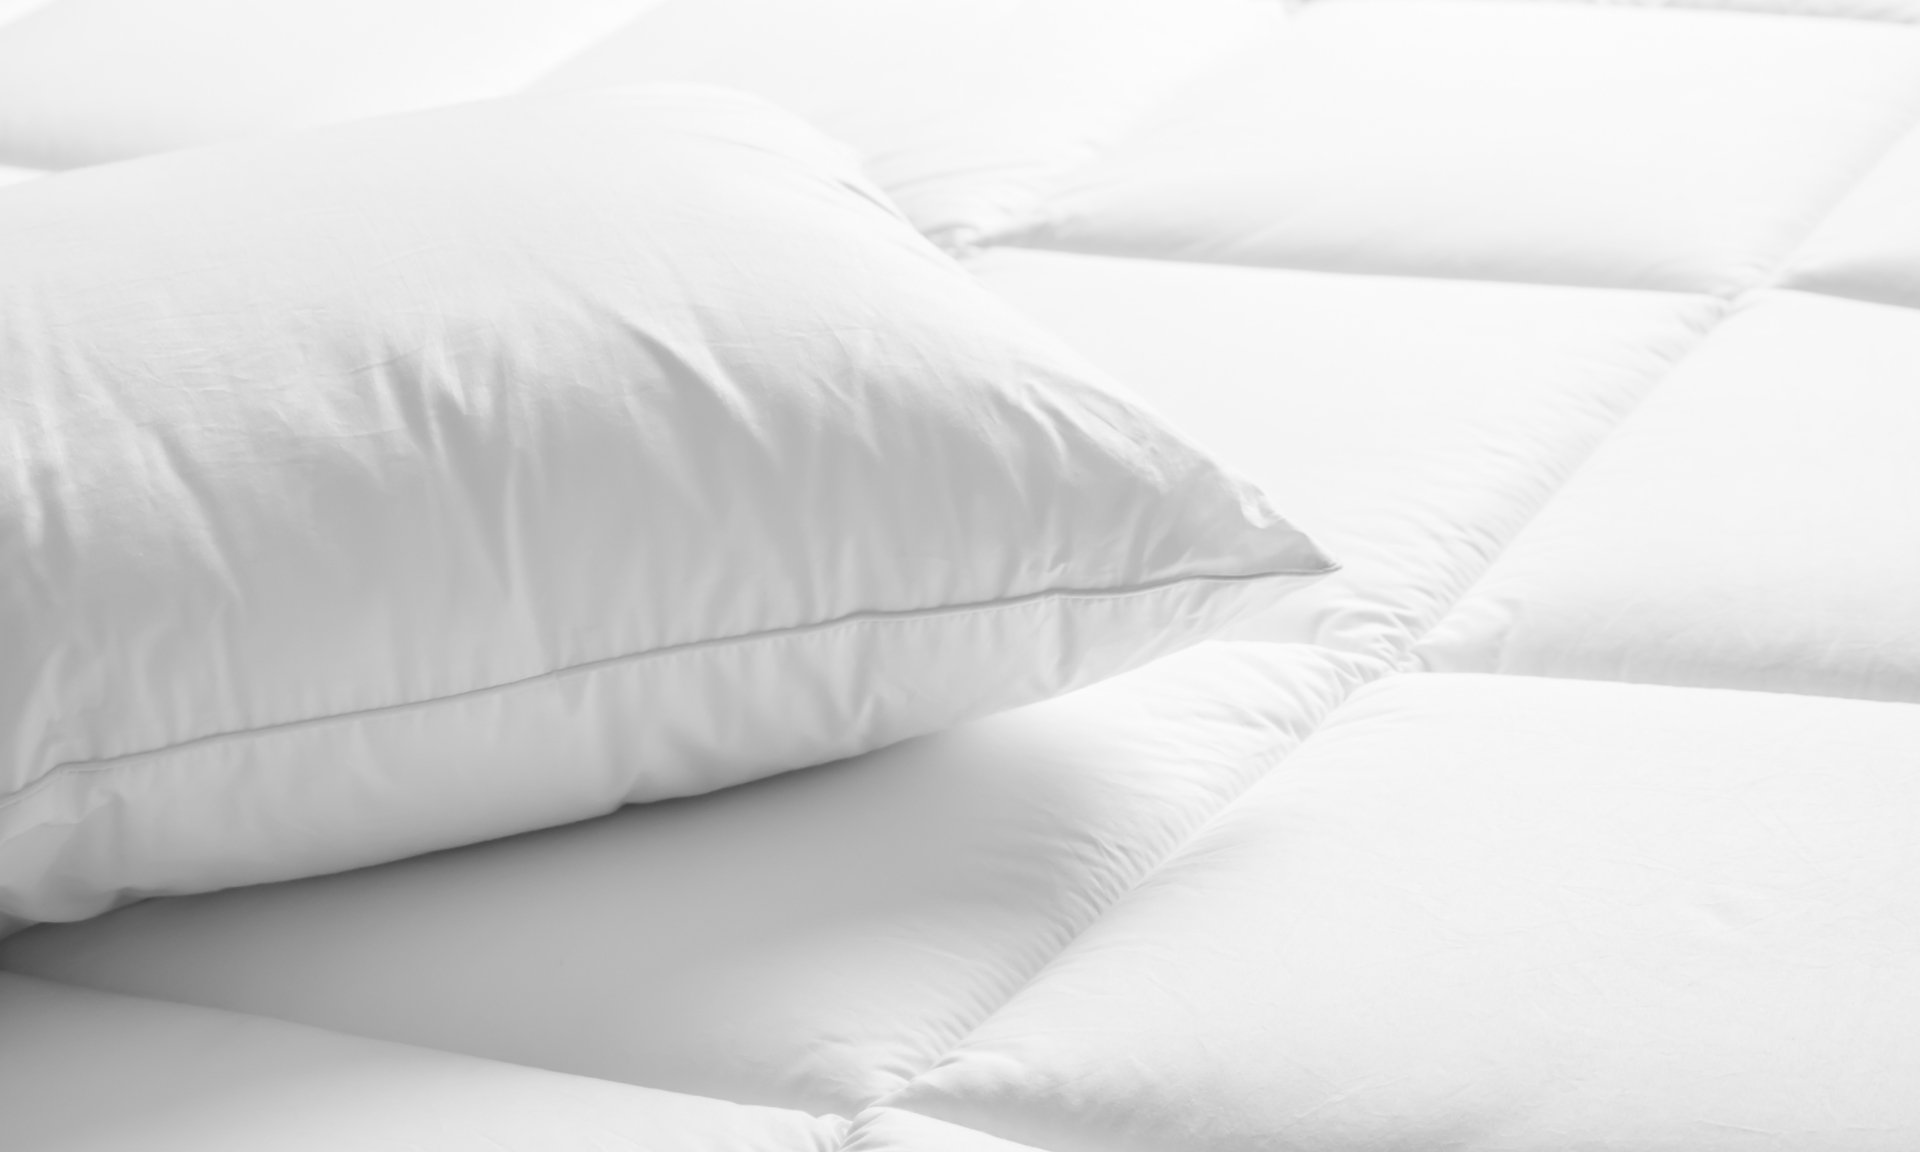 Shop for pillows, sheets, pad and more accessories for your mattress.